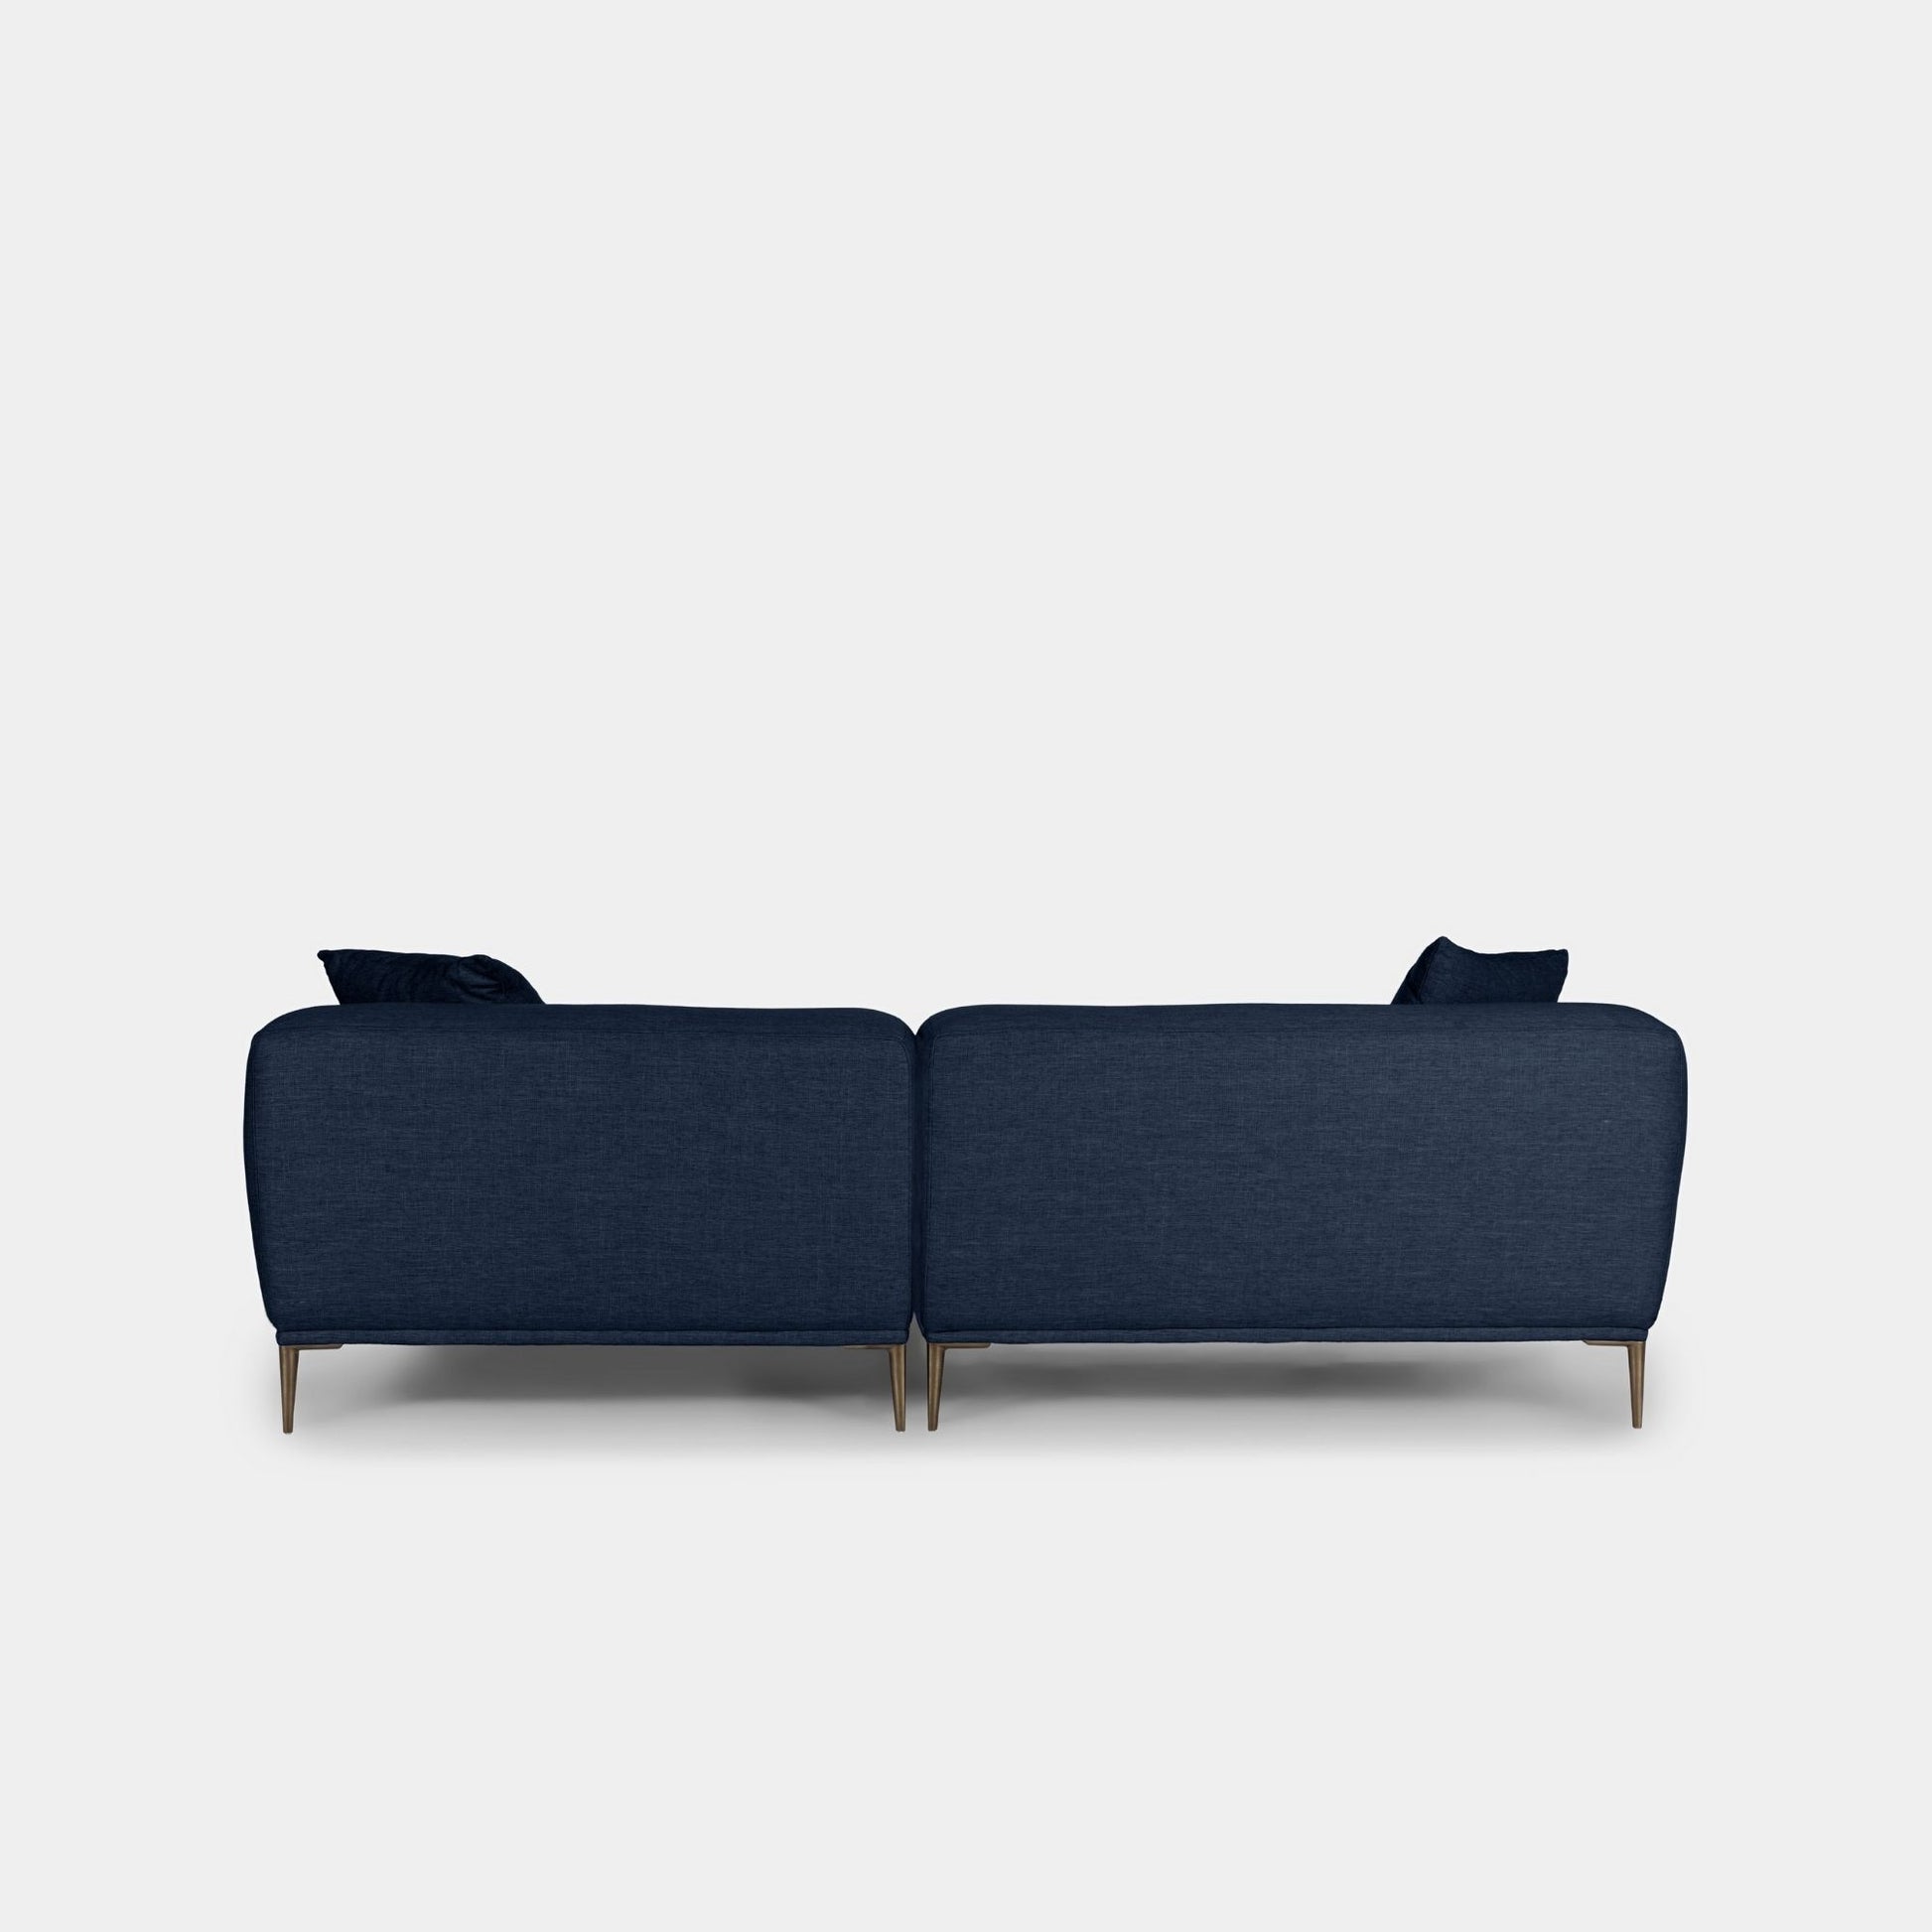 Crystal fabric sectional sofa right blue